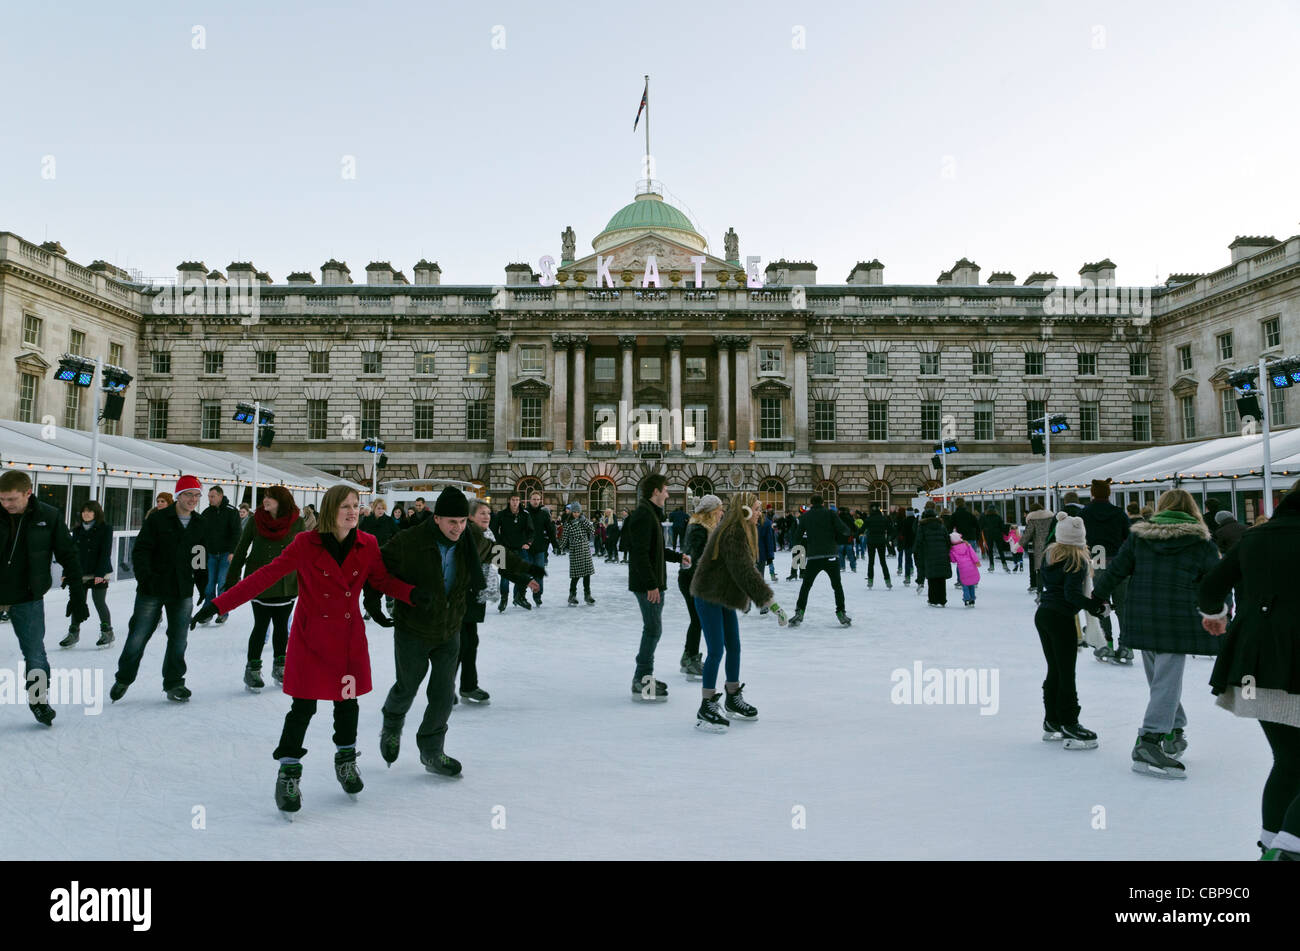 Ice skaters at Somerset House ice rink London England Great Britain UK Stock Photo